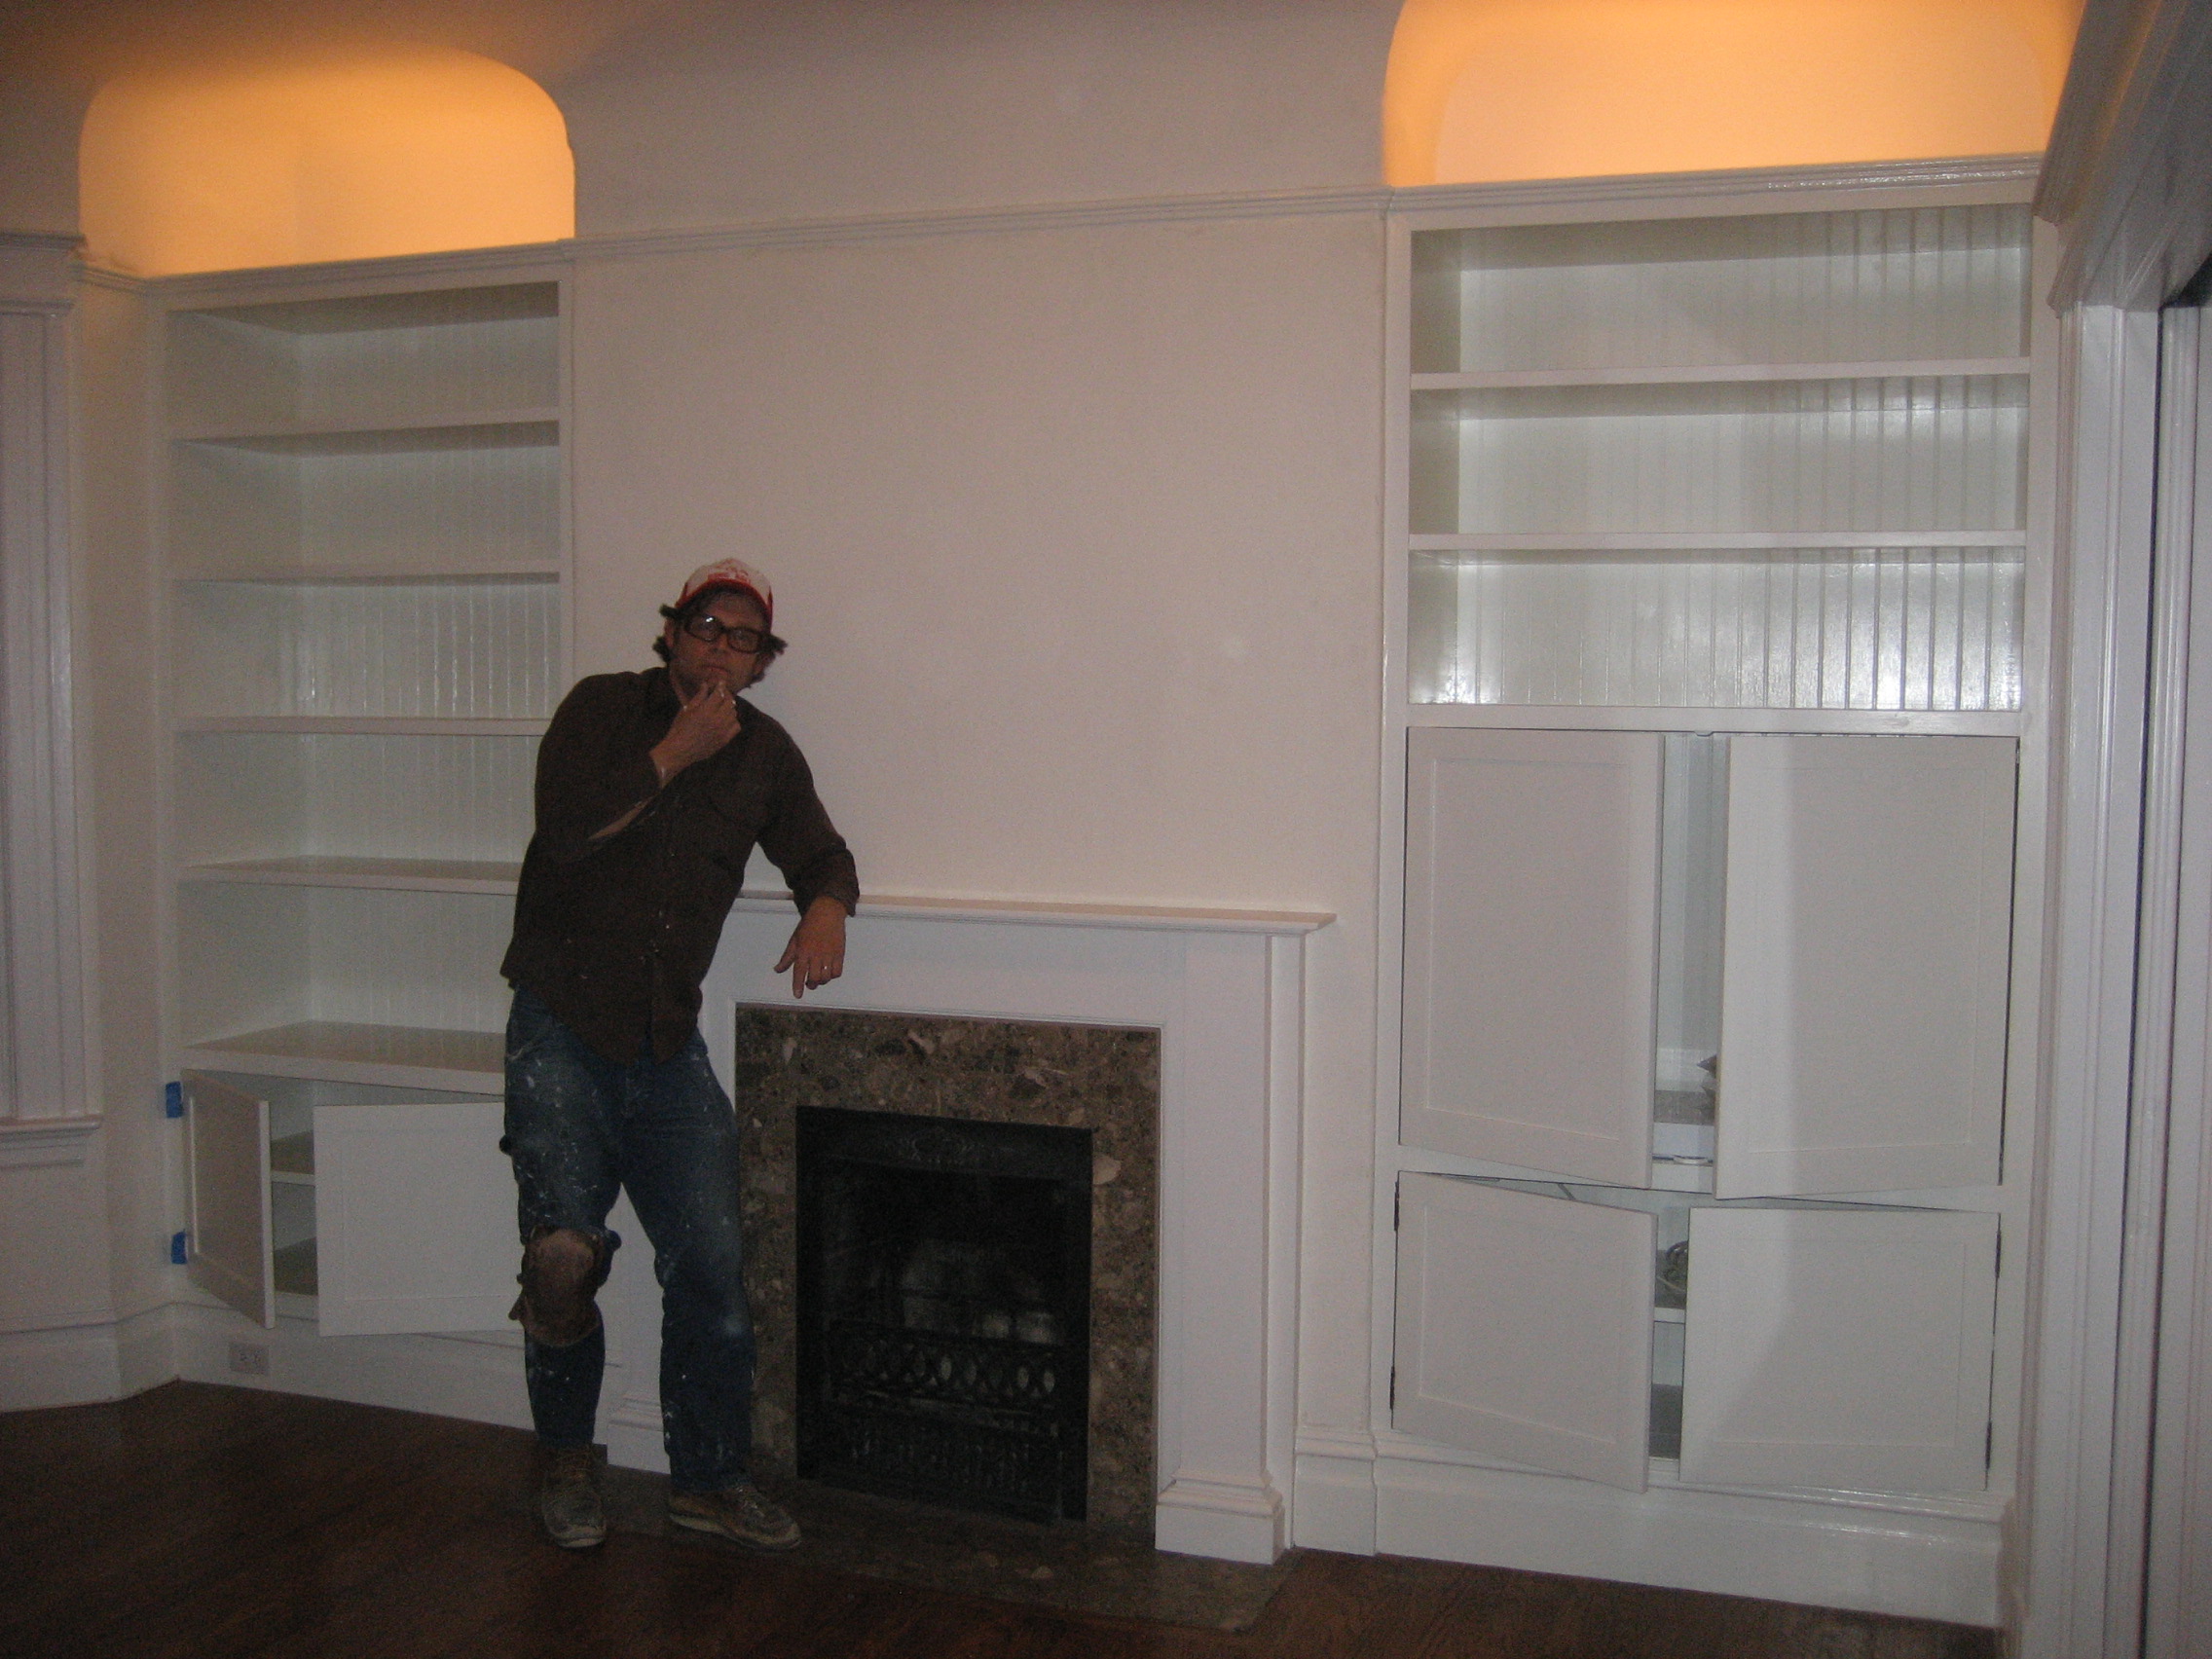 Fireplace with Built in Shelves